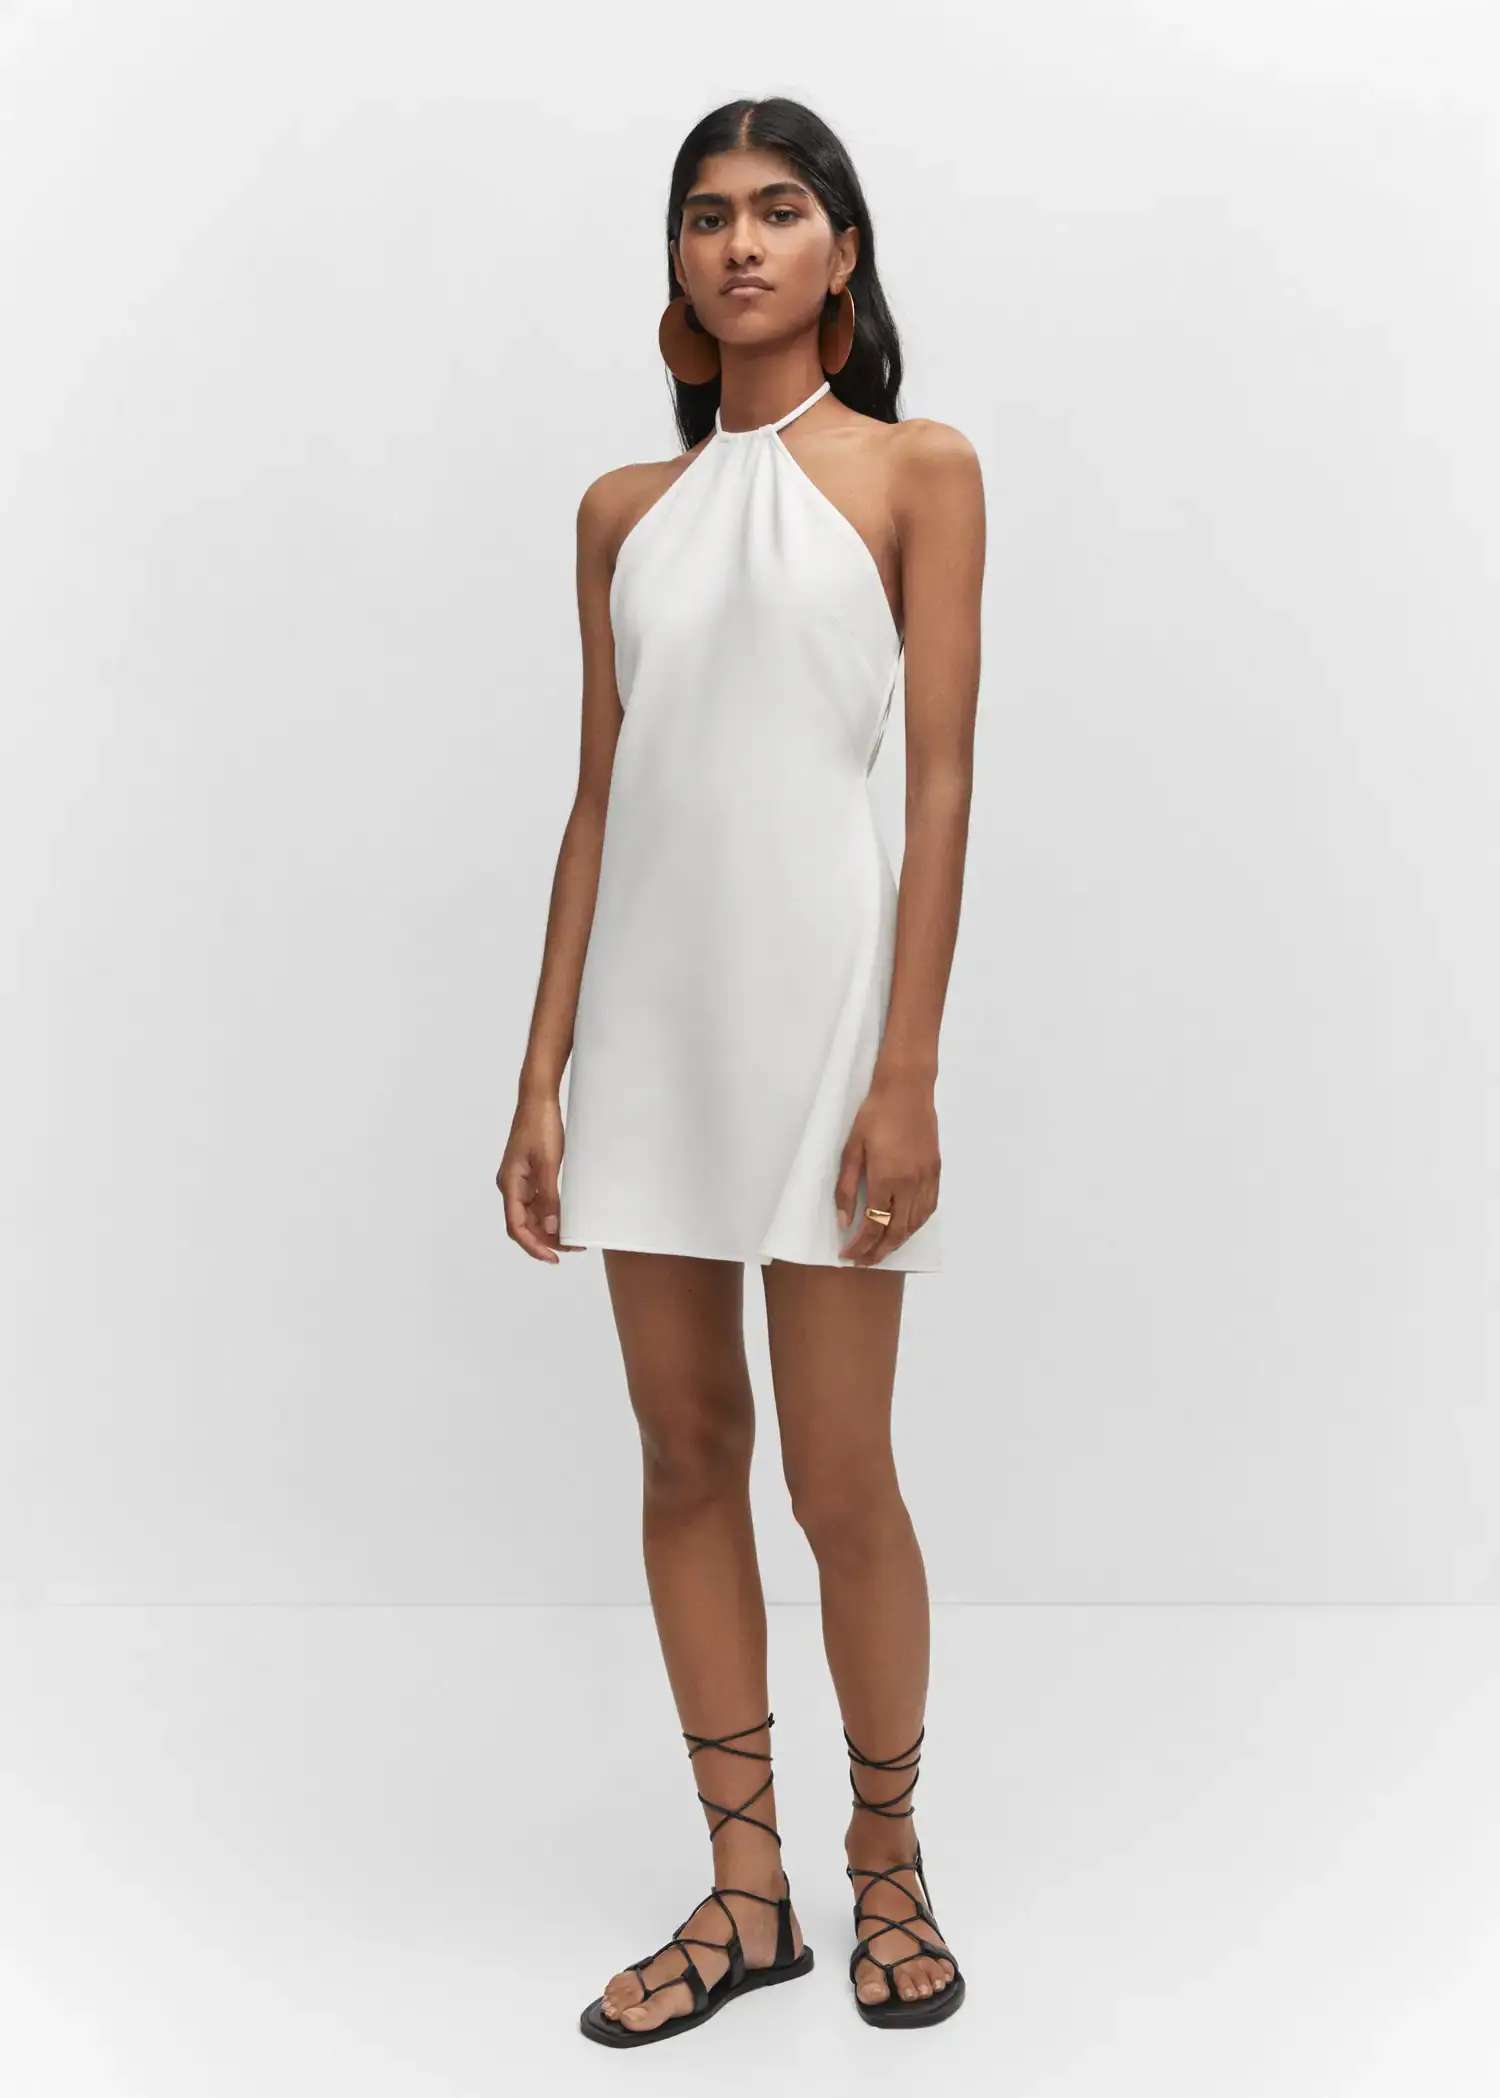 Mango Halter-neck dress with metal detail. a woman in a white dress standing in front of a white wall. 